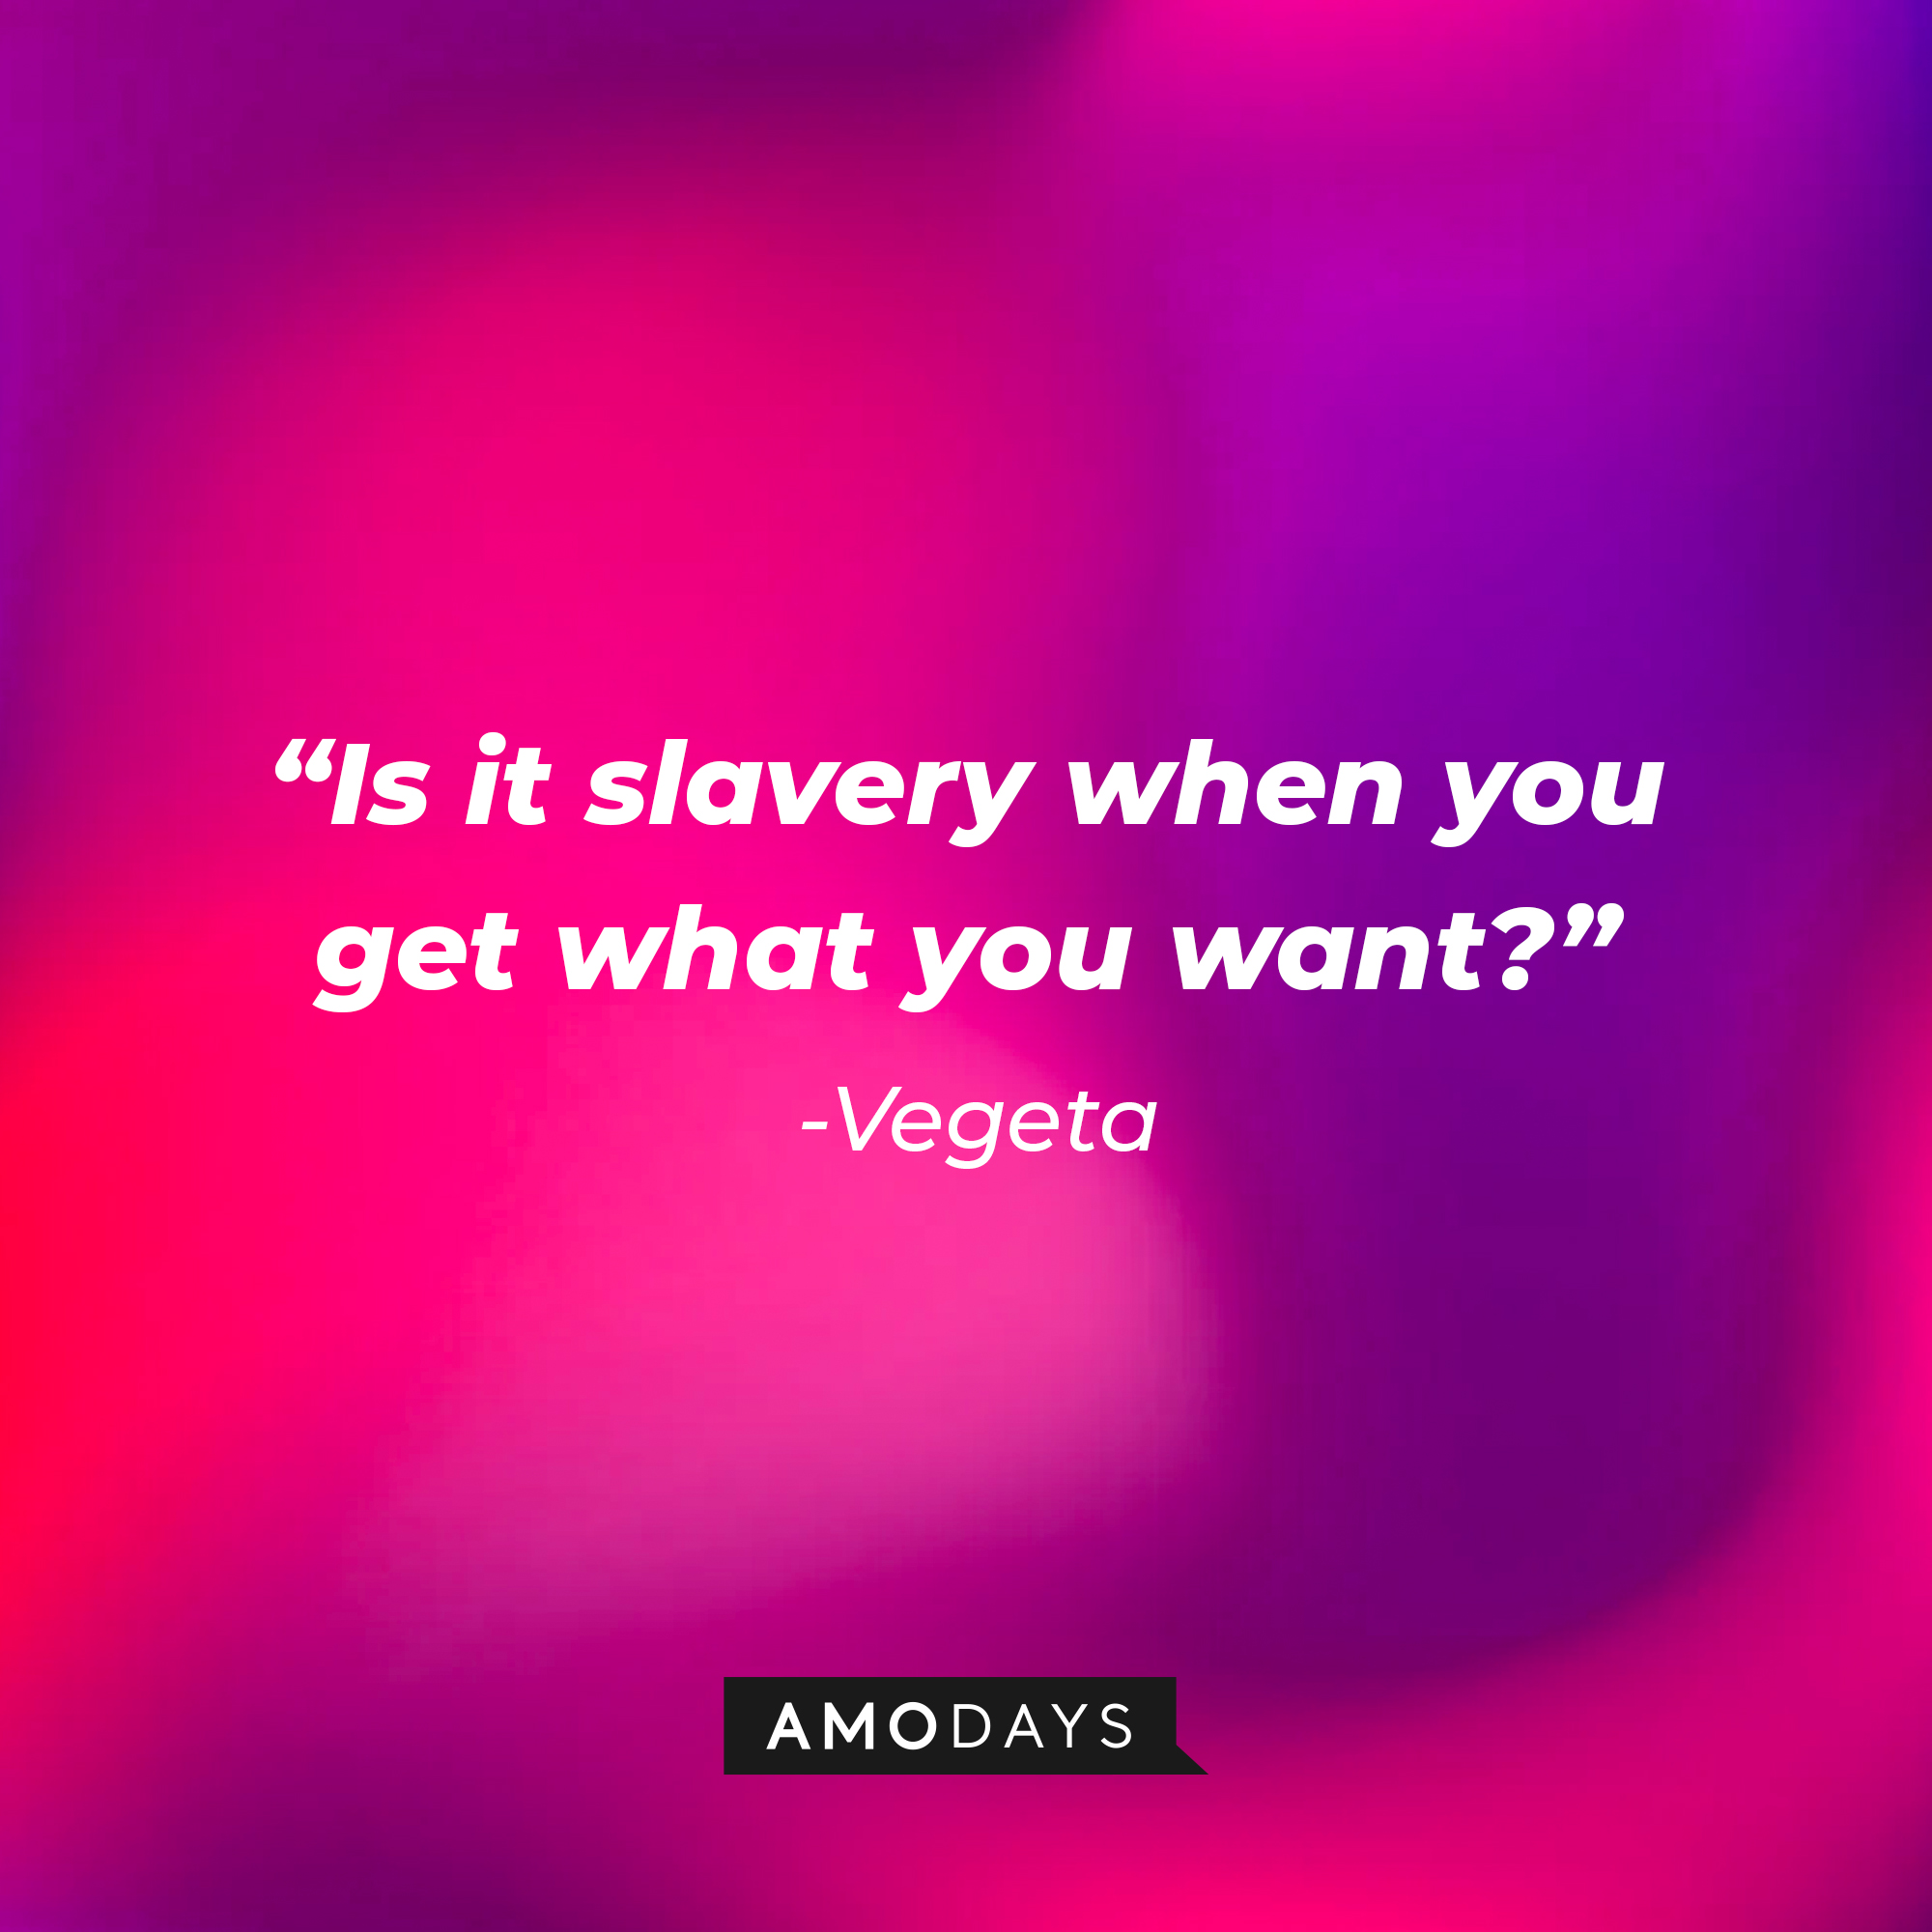 Vegeta’s quote: “Is it slavery when you get what you want?” | Source: AmoDays